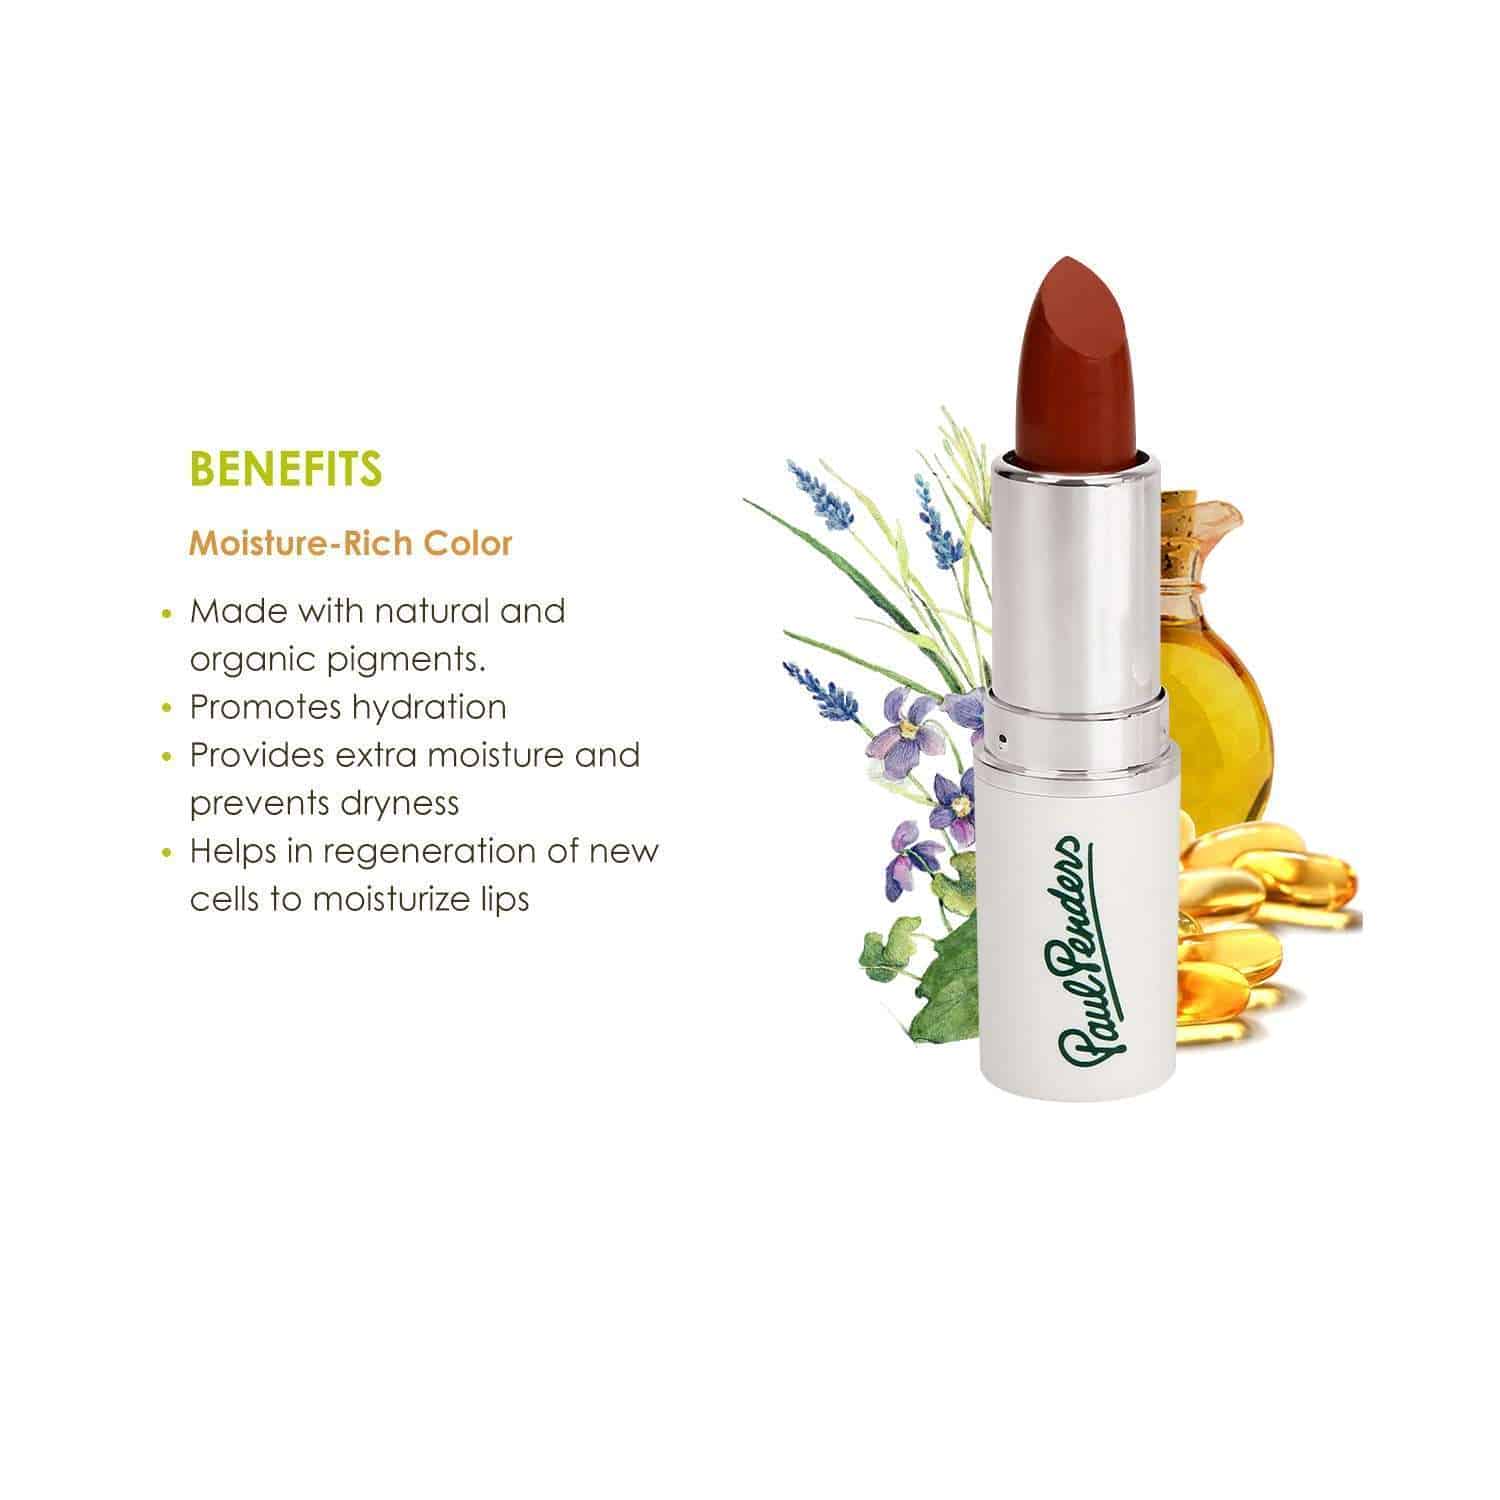 Paul Penders Hand Made Natural Cream Lipstick For A Natural Look | Moisture Rich Colour – Mulberry 4g